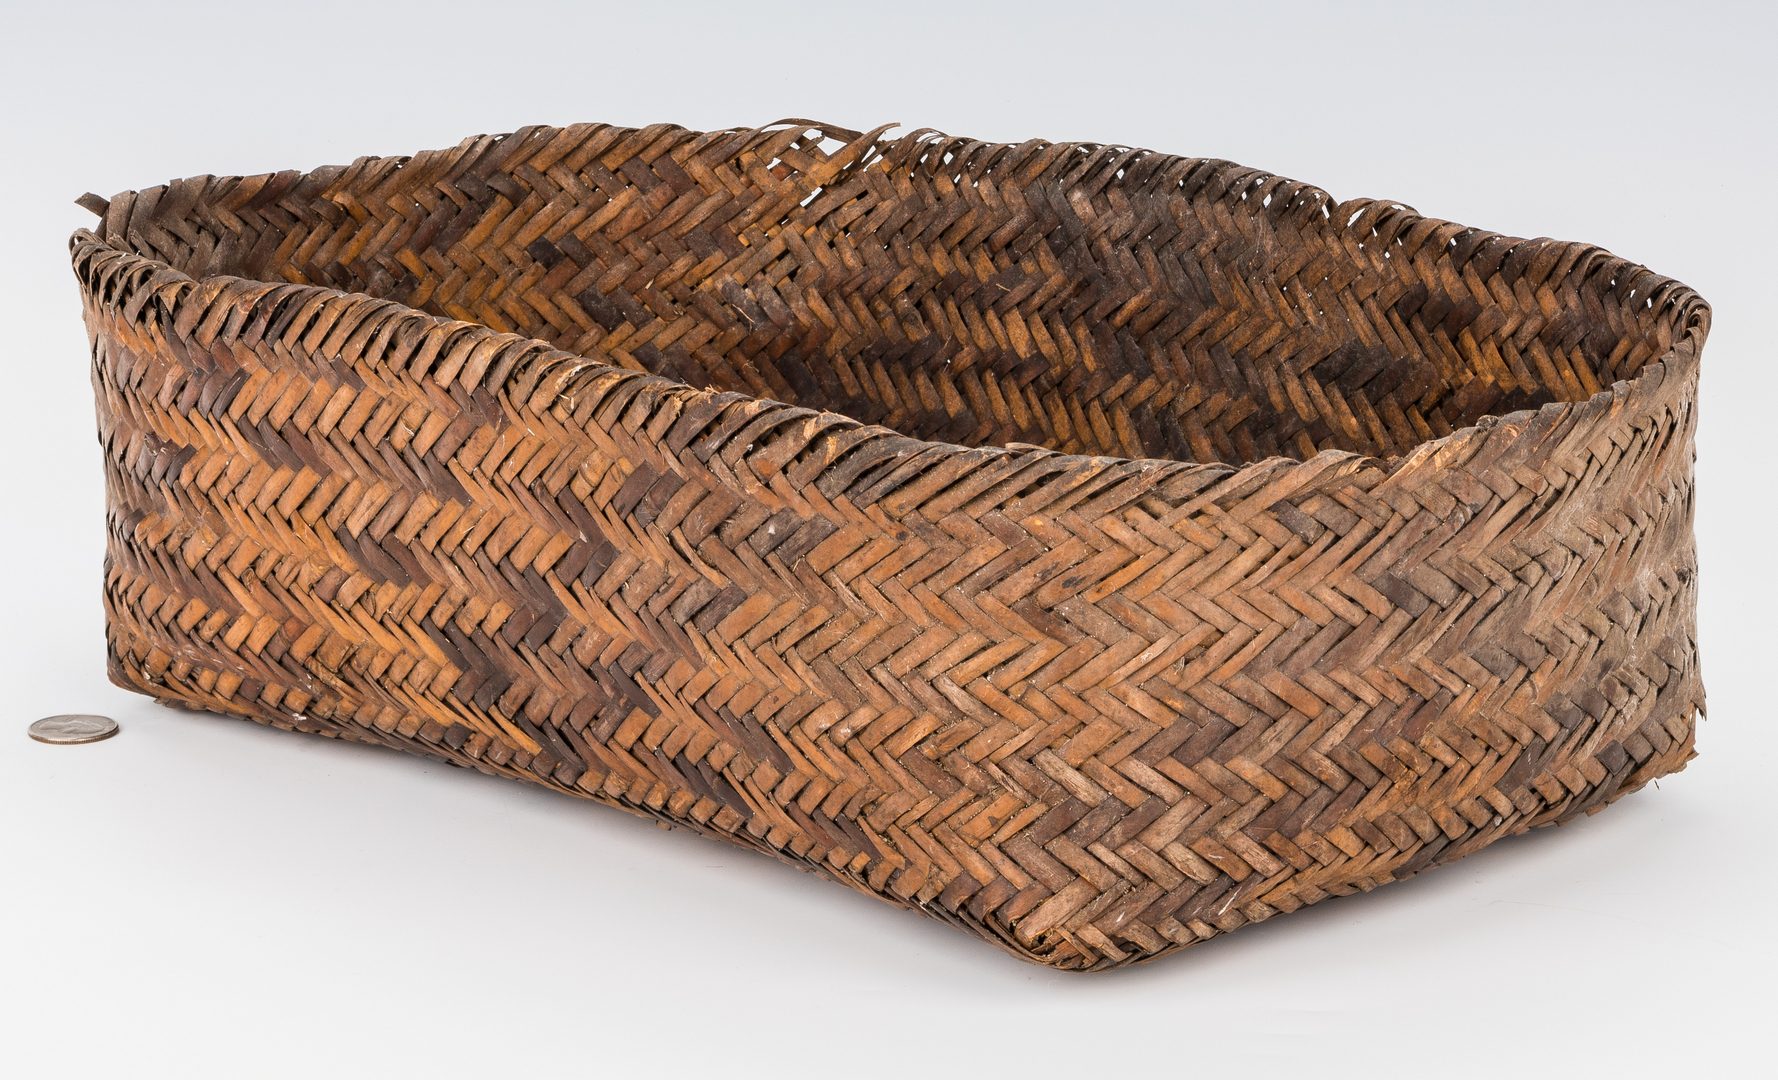 Lot 670: 19th Cent. Cherokee Double Weave Basket